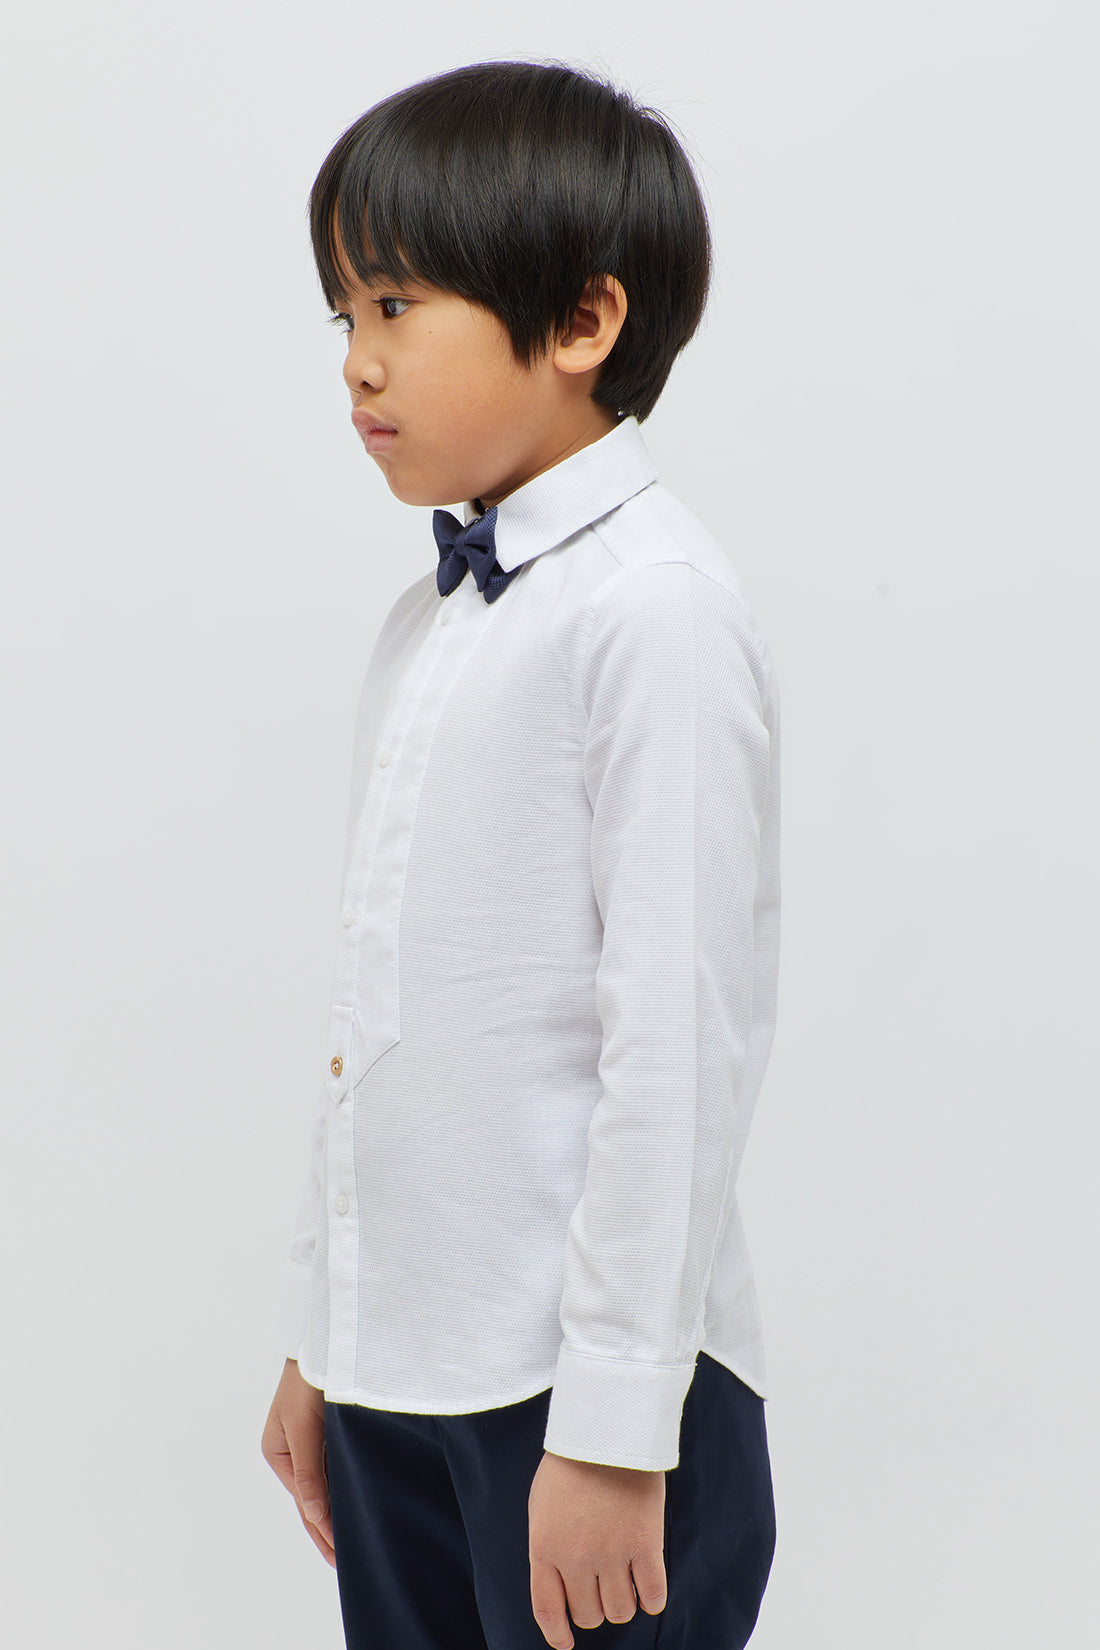 One Friday Classic Off White Formal Shirt